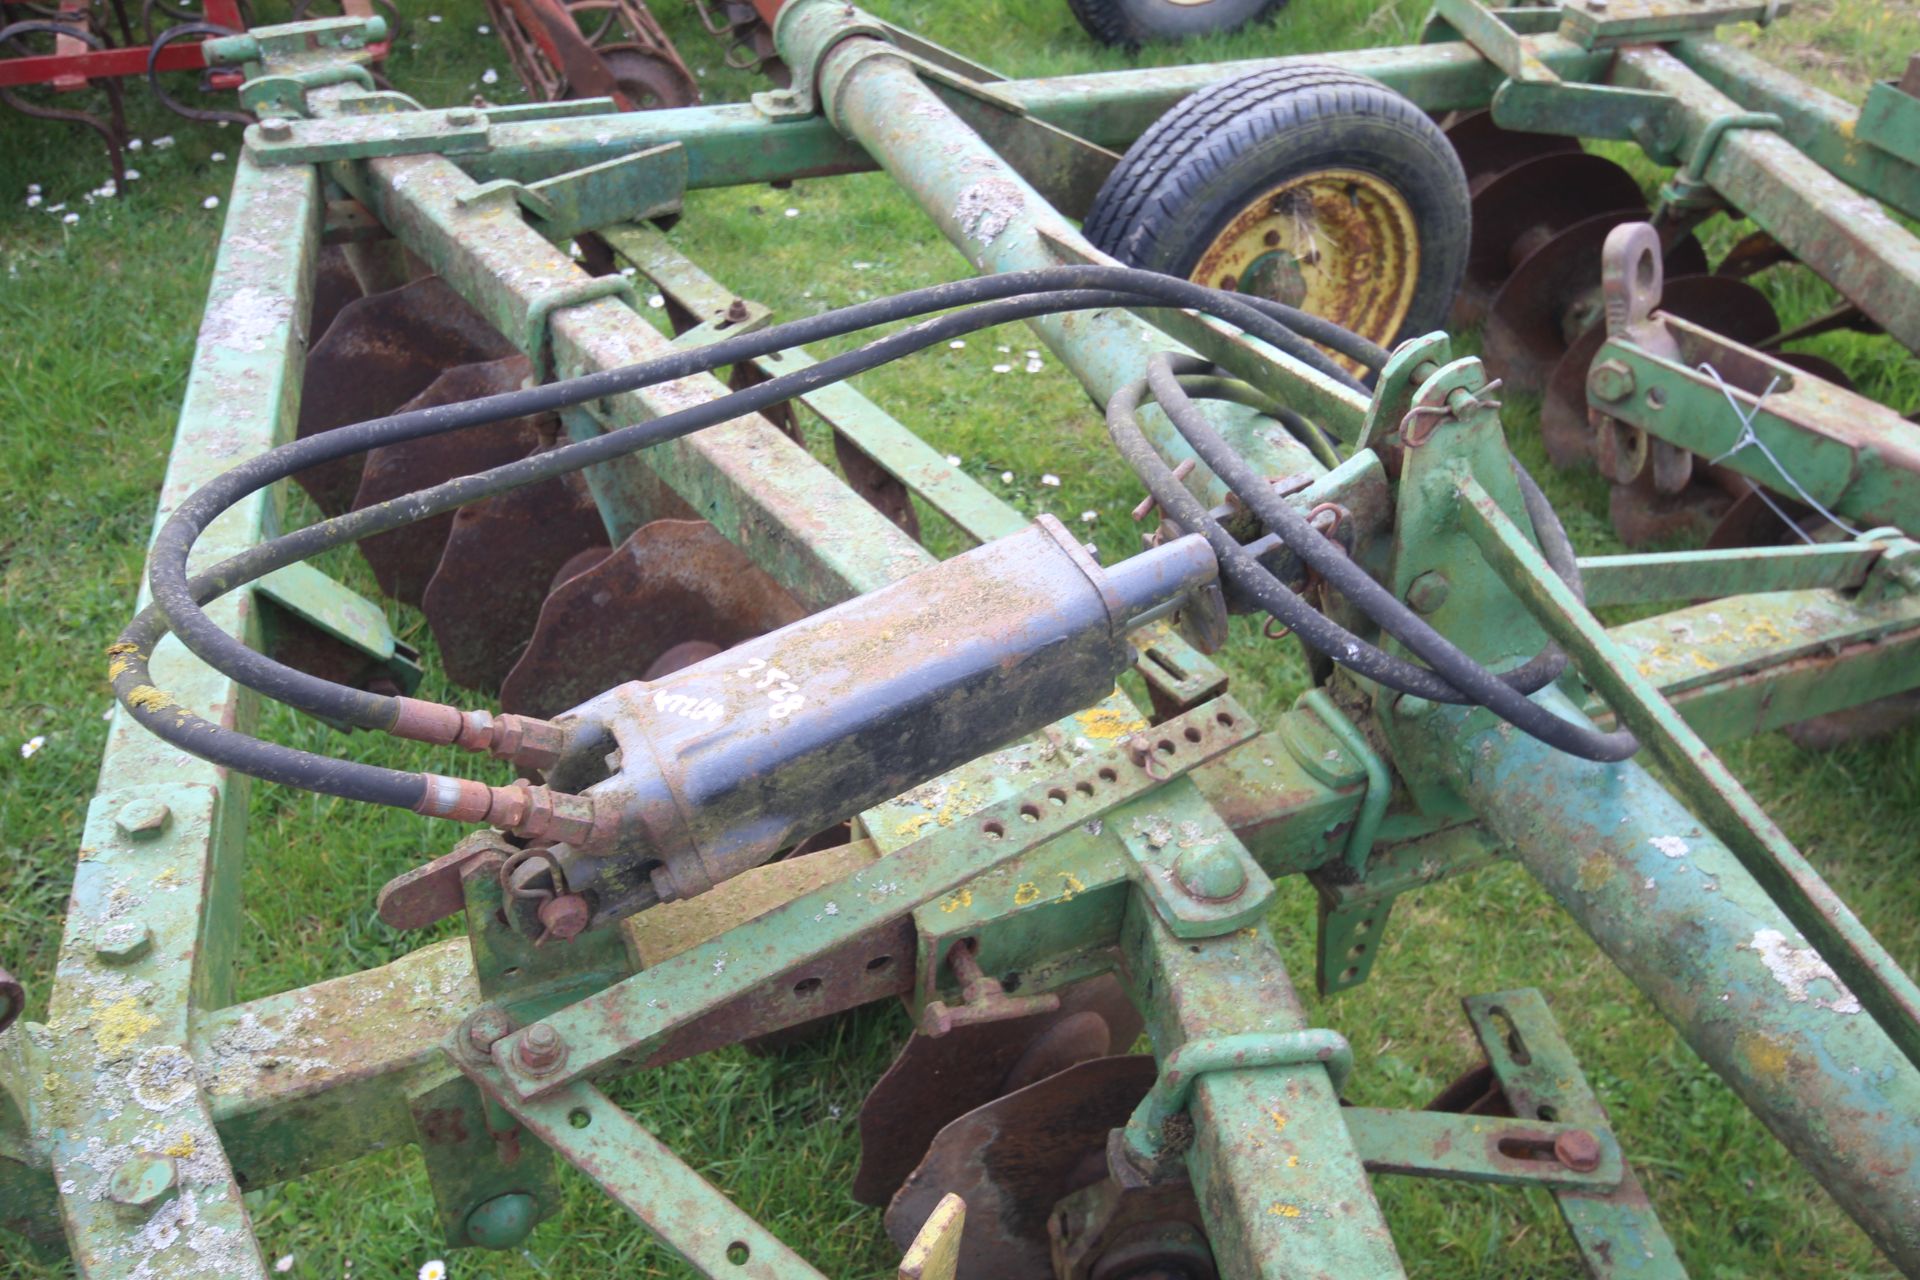 John Deere 3.5m trailed discs. For sale due to retirement. V - Image 4 of 15